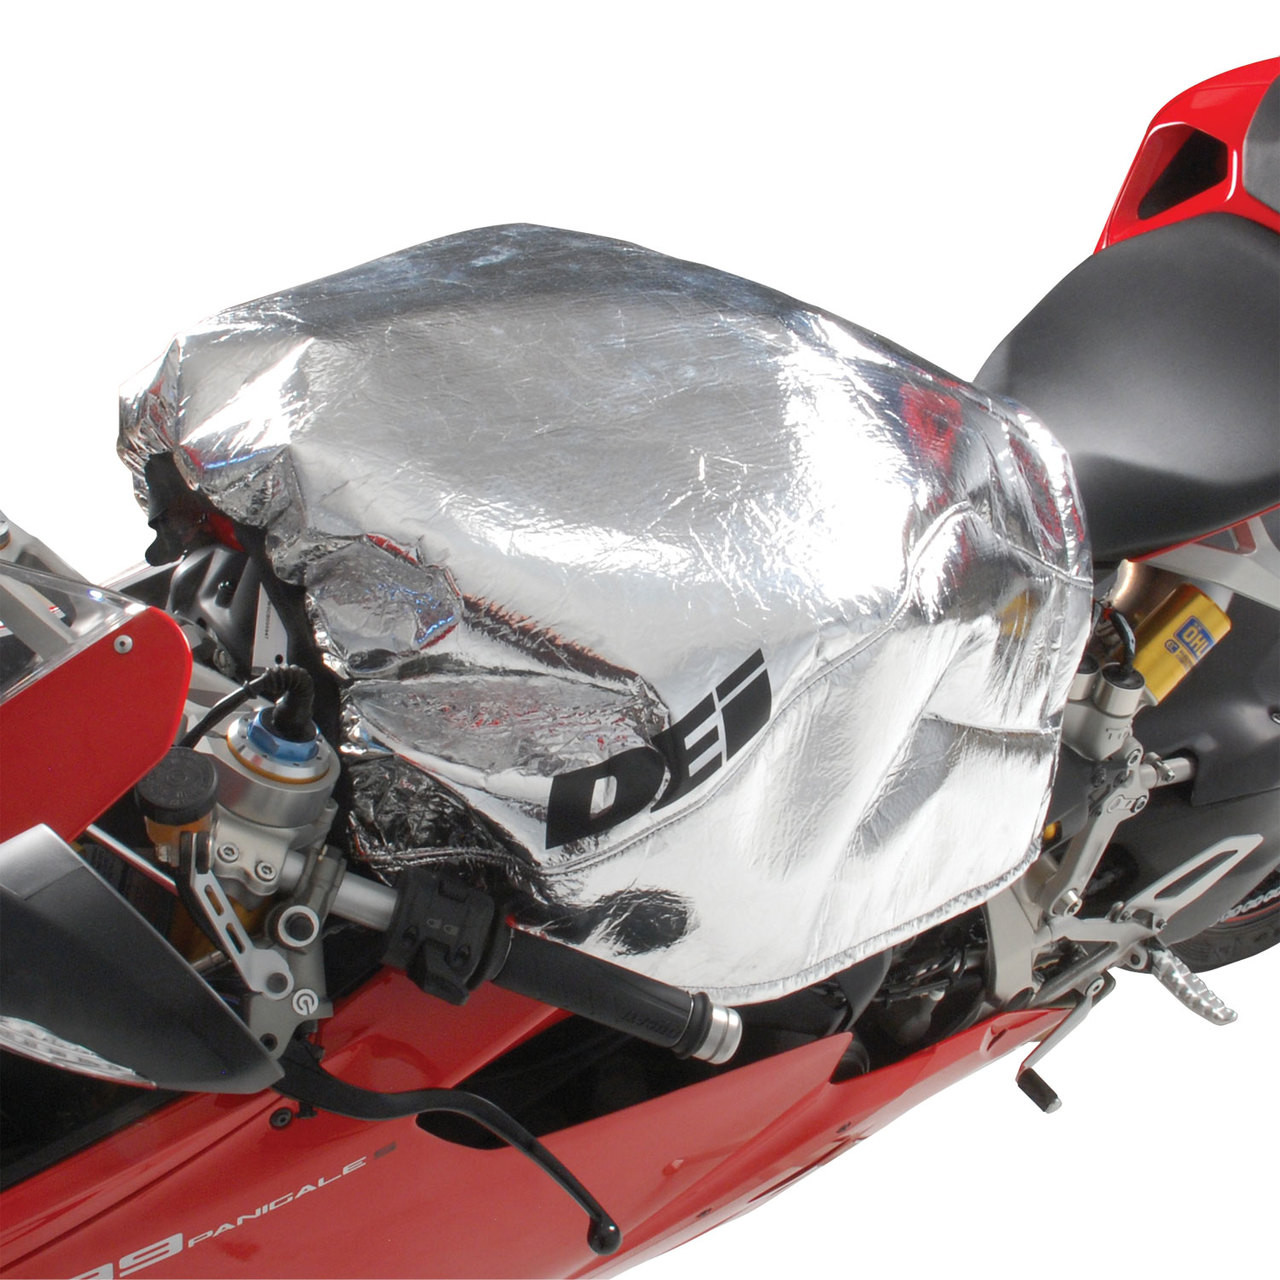 Motorcycle Fuel Tank Cover - Design Engineering, Inc